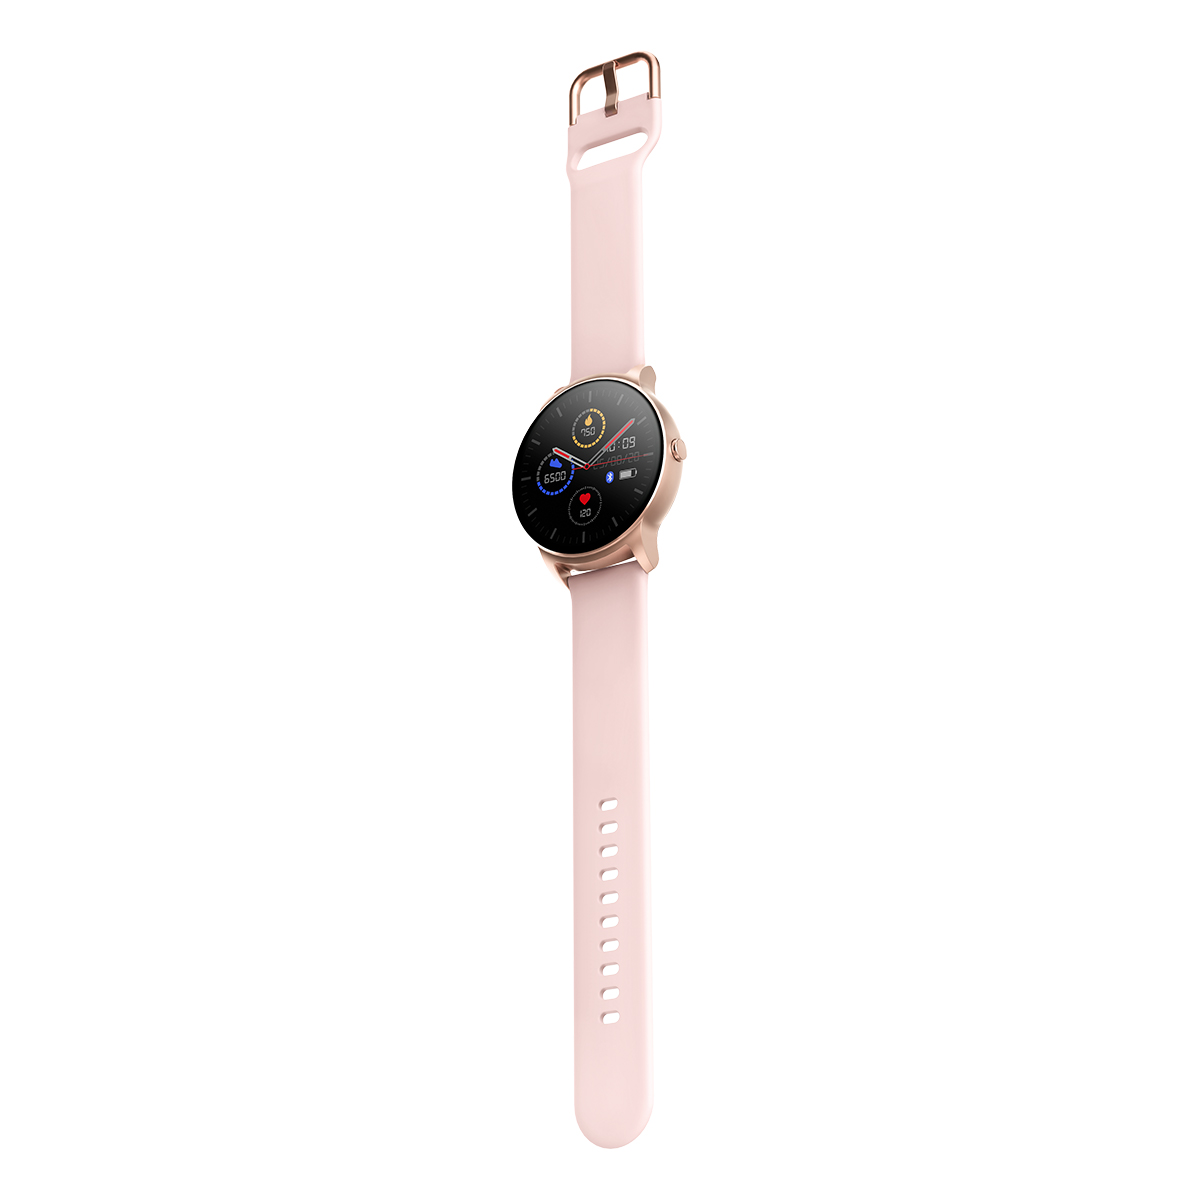 Forever smartwatch ForeVive 2 SB-330 rowe zoto / 7